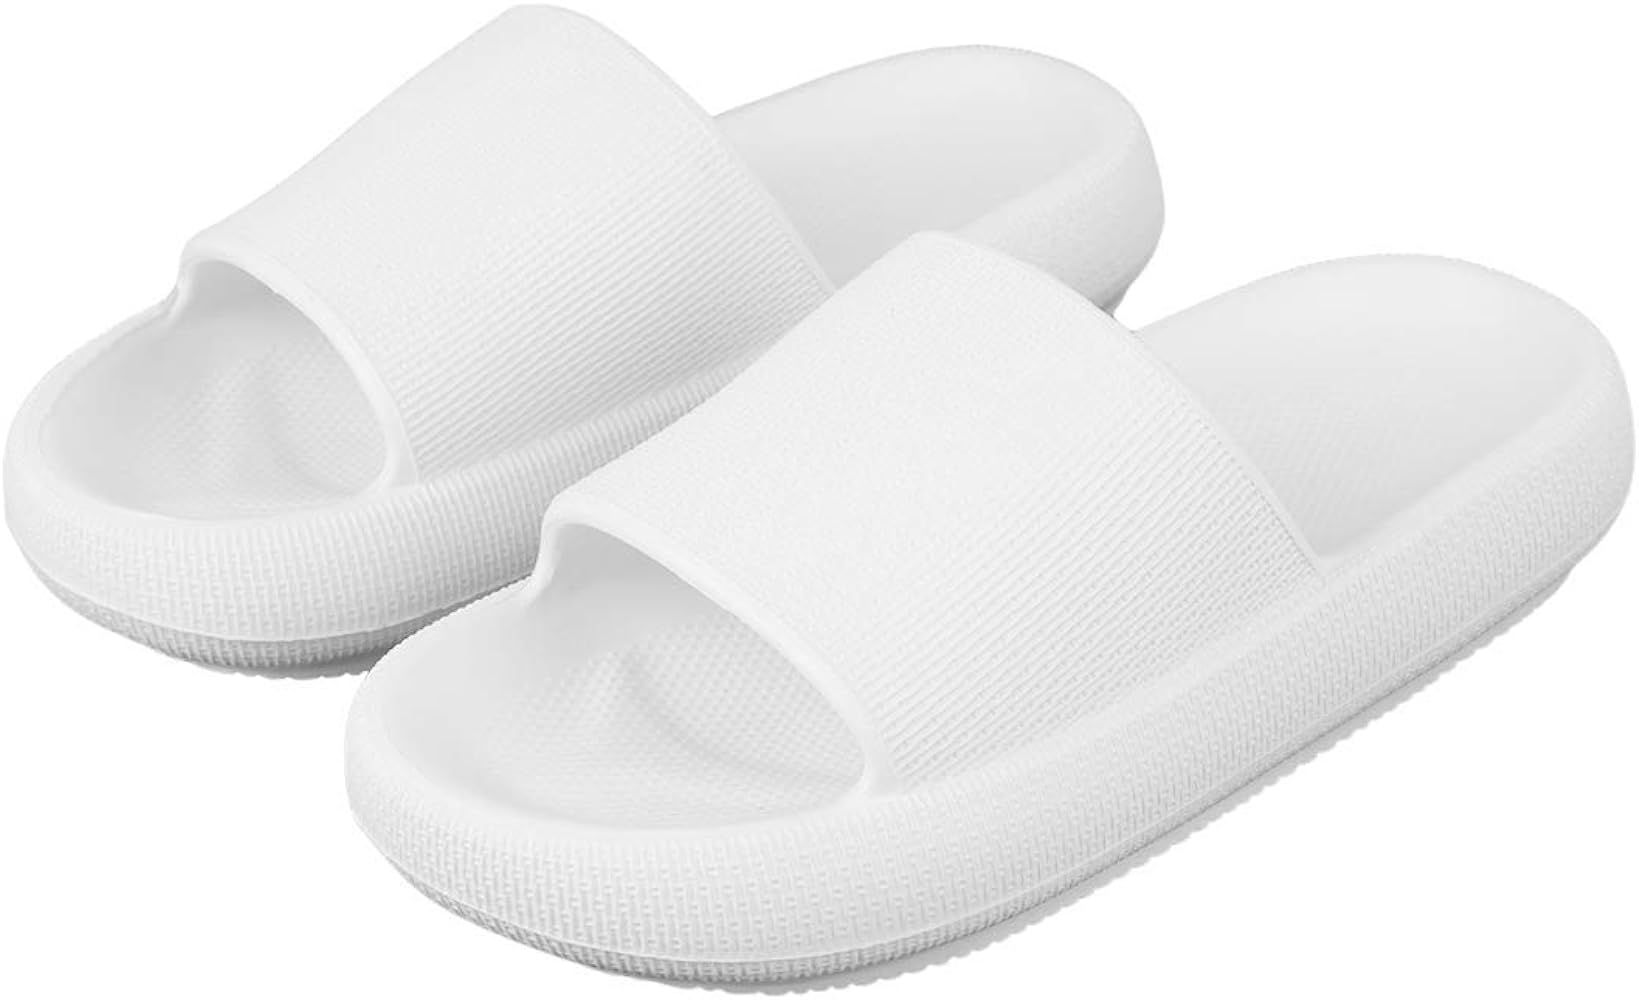 Menore Slippers for Women and Men Quick Drying, EVA Open Toe Soft Slippers, Non-Slip Soft Shower Spa | Amazon (US)